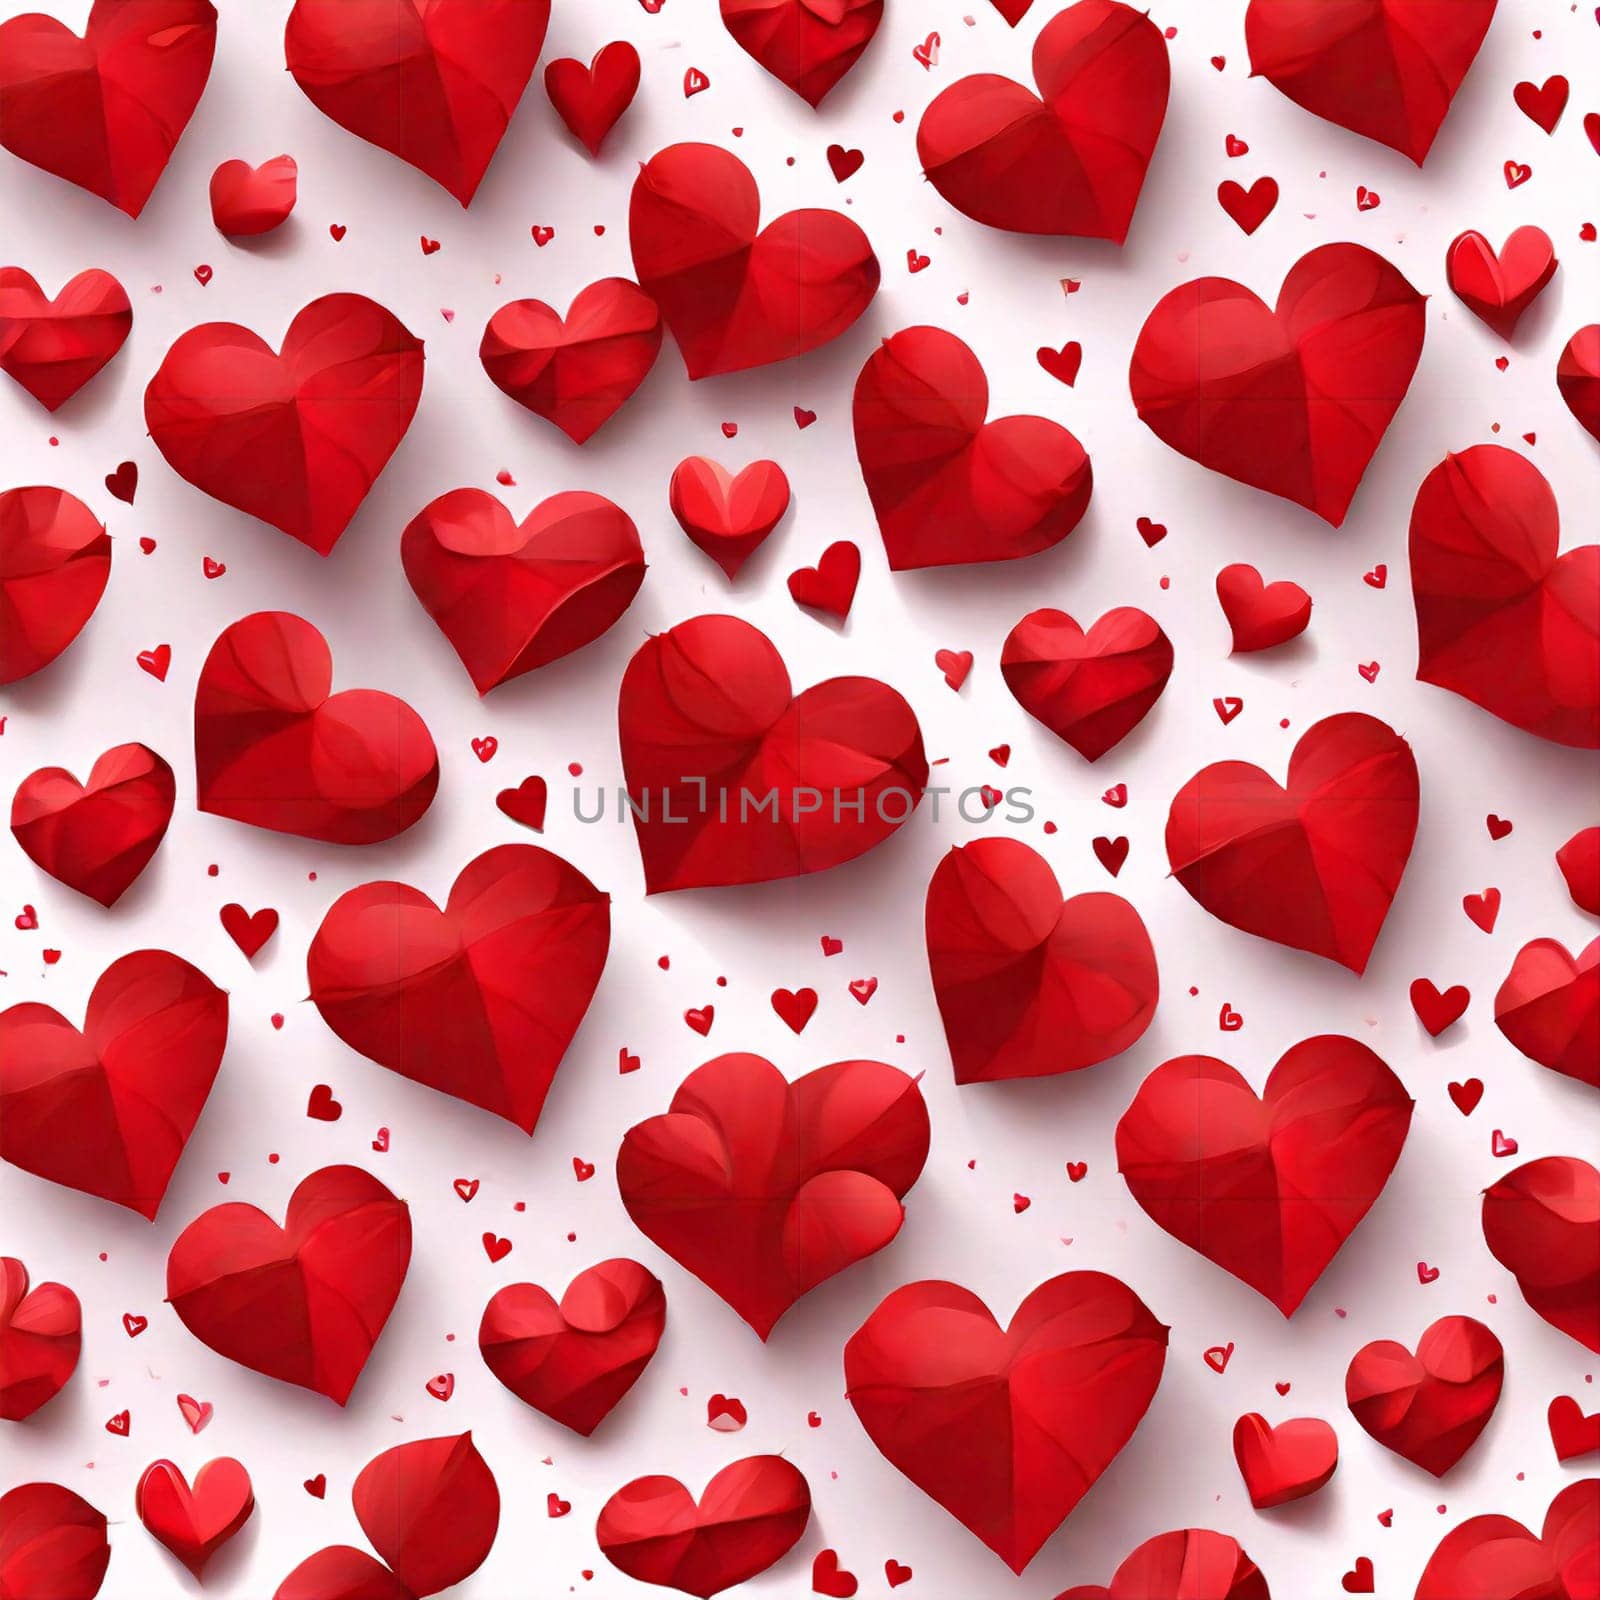 Seamless pattern of red hearts on a white background by Севостьянов